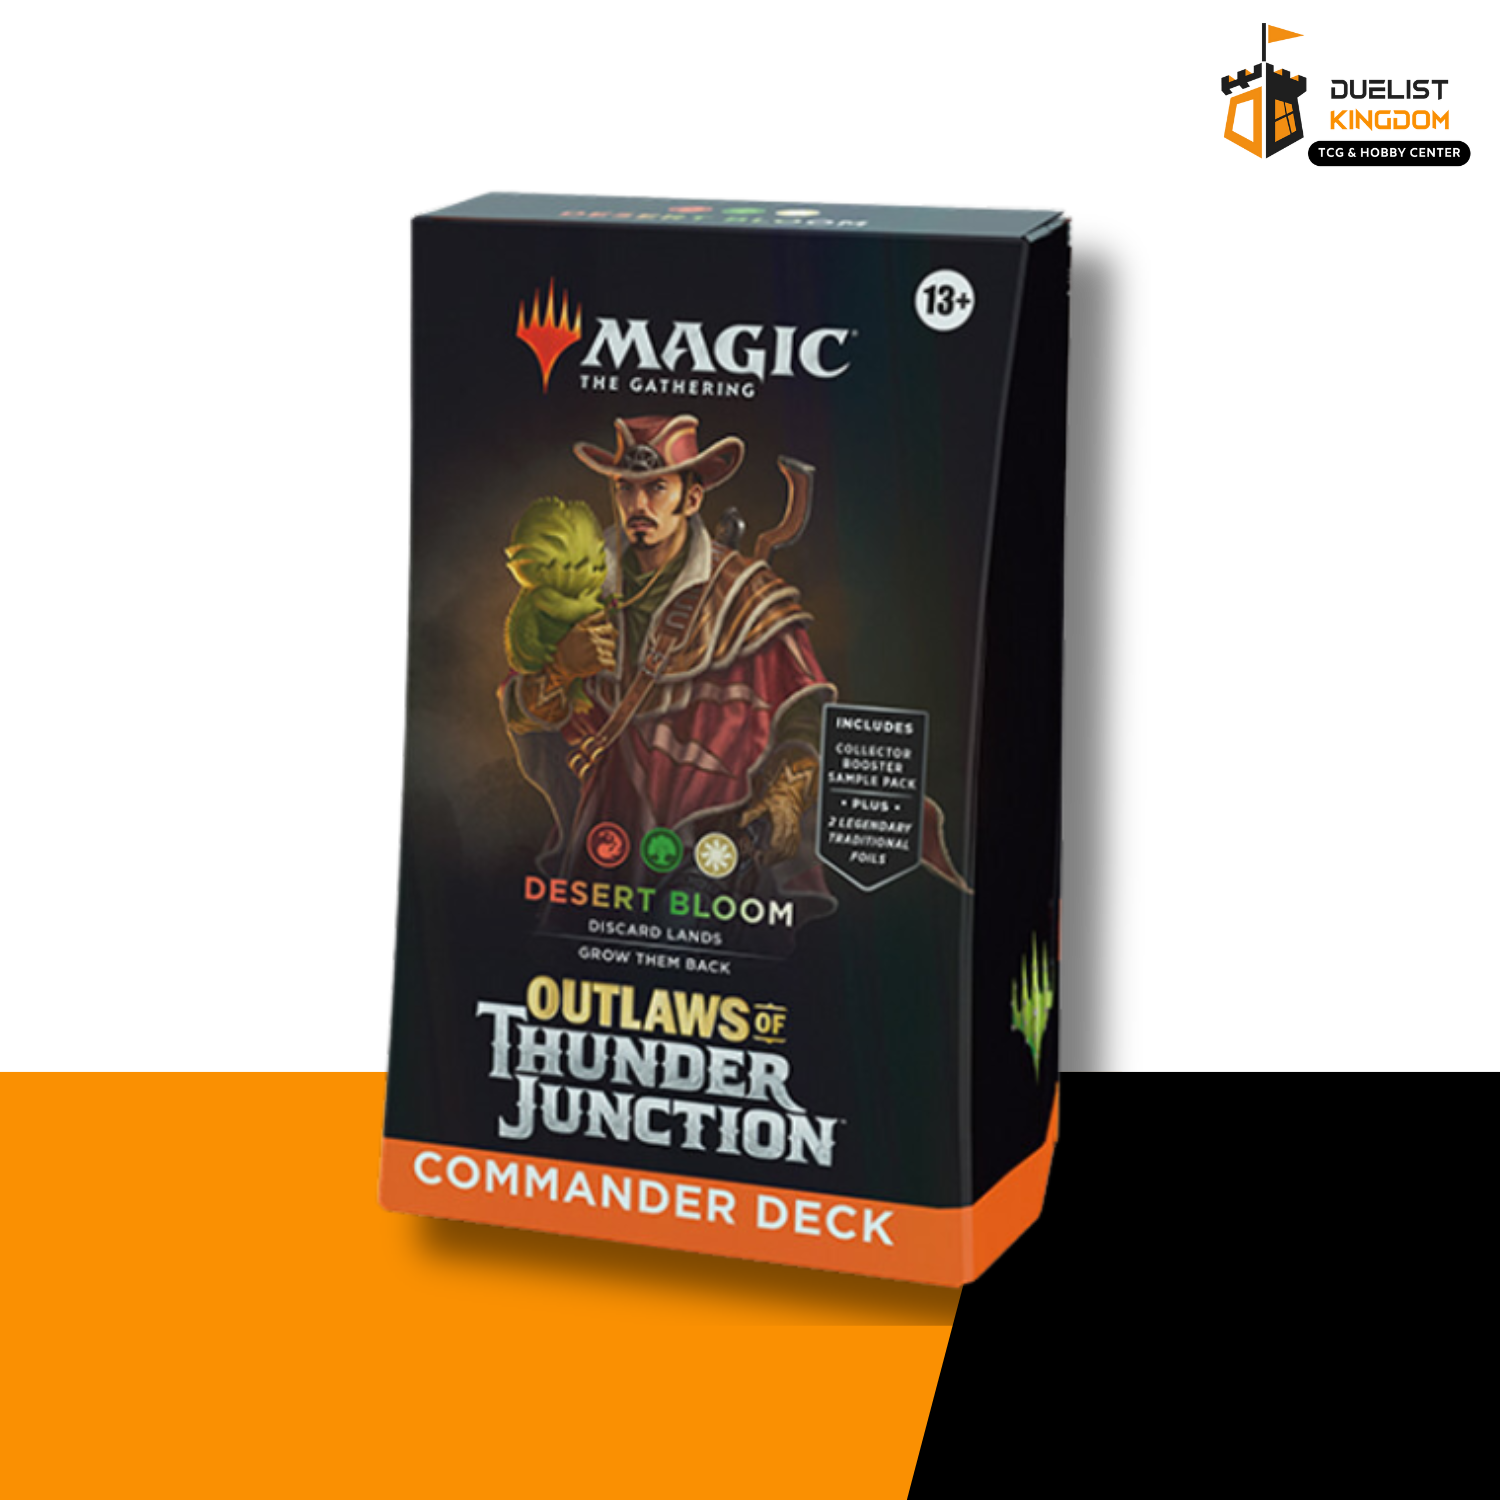 Magic: The Gathering Outlaws of Thunder Junction Commander Deck DB